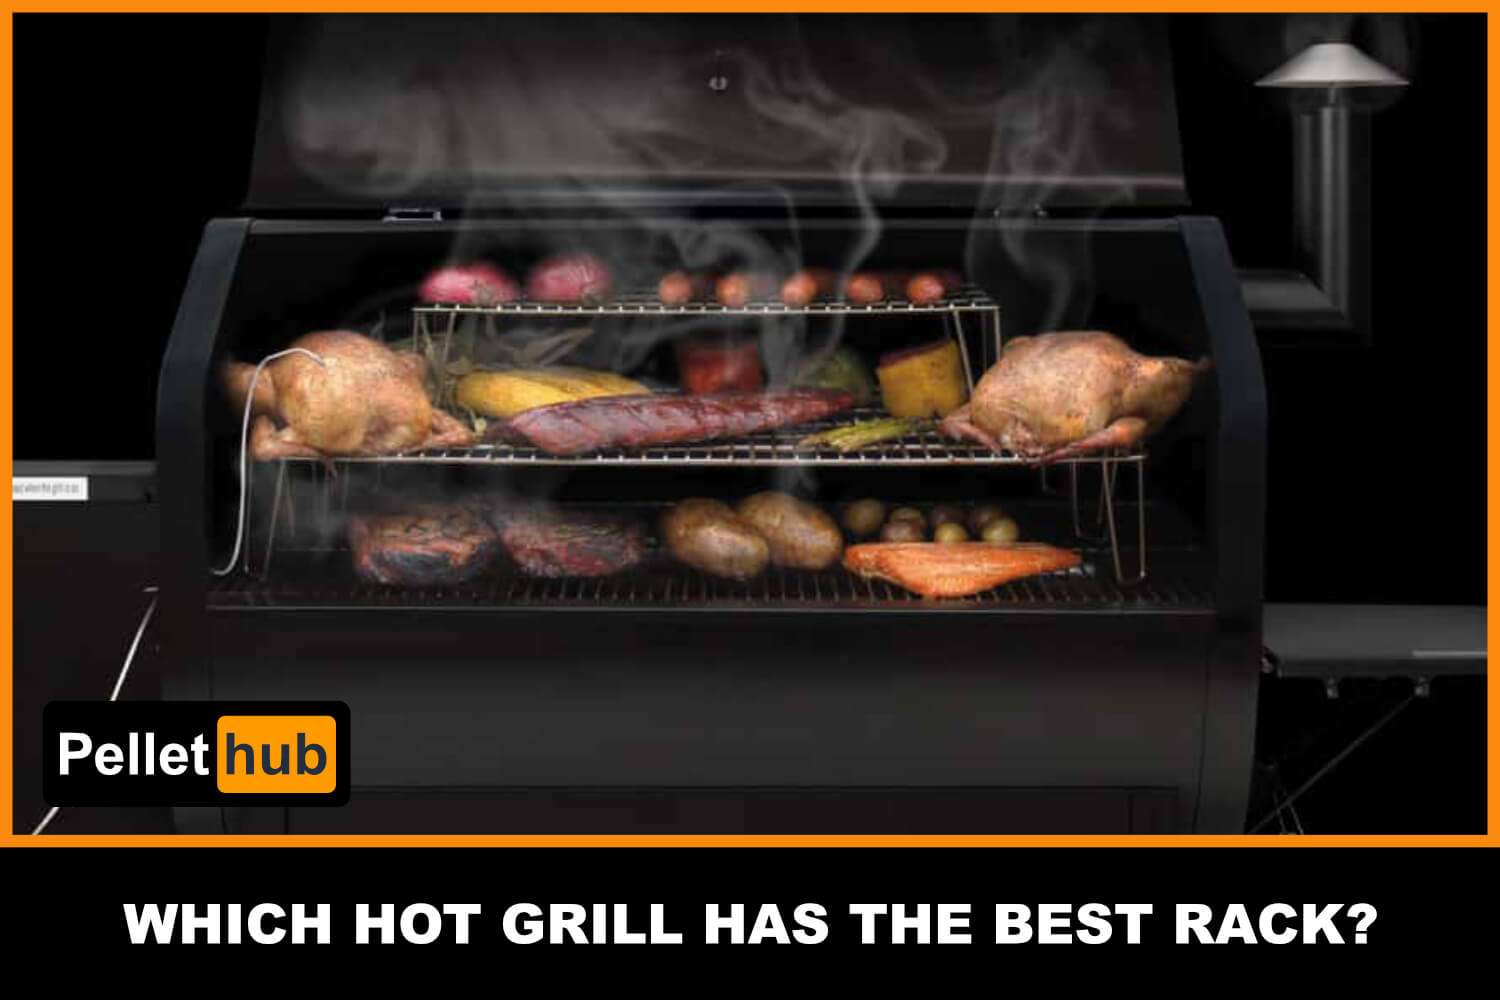 "Which hot grill has the best rack?"